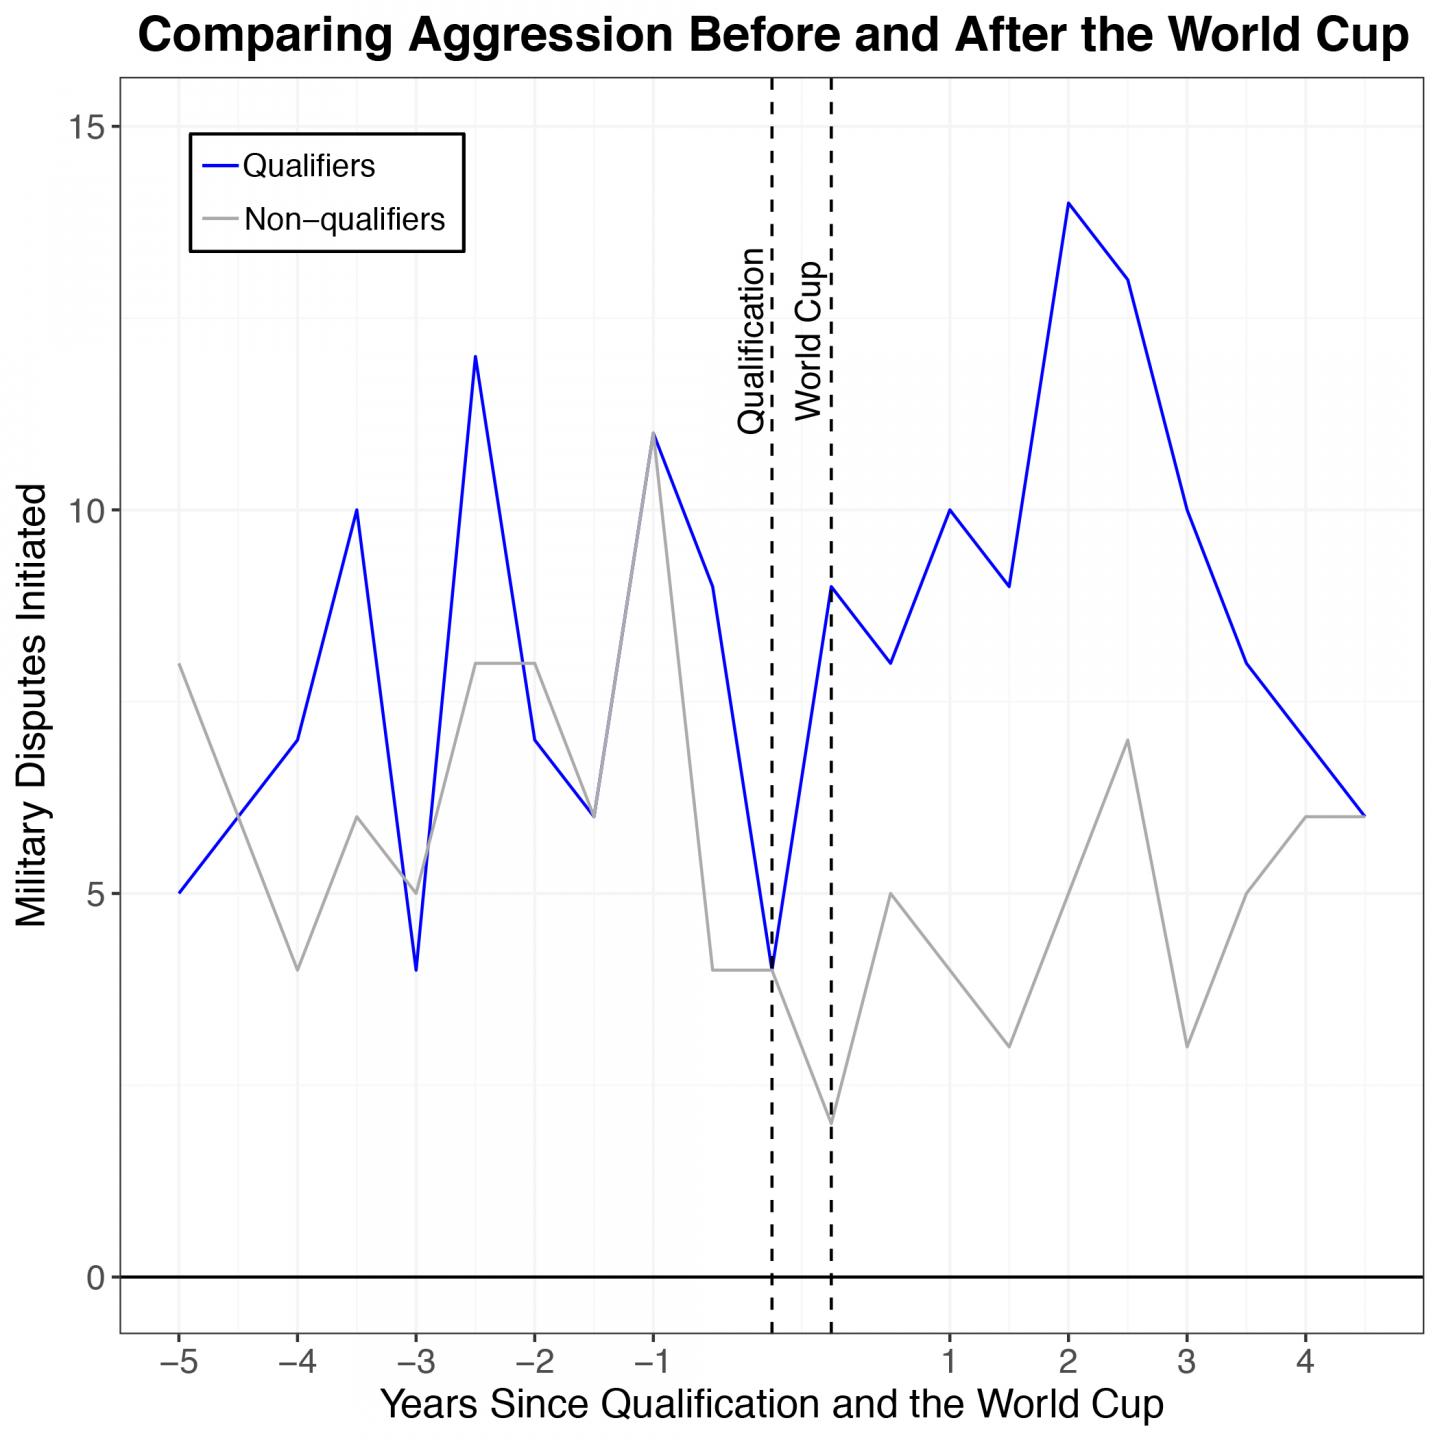 Comparing Aggression Before and After the World Cup